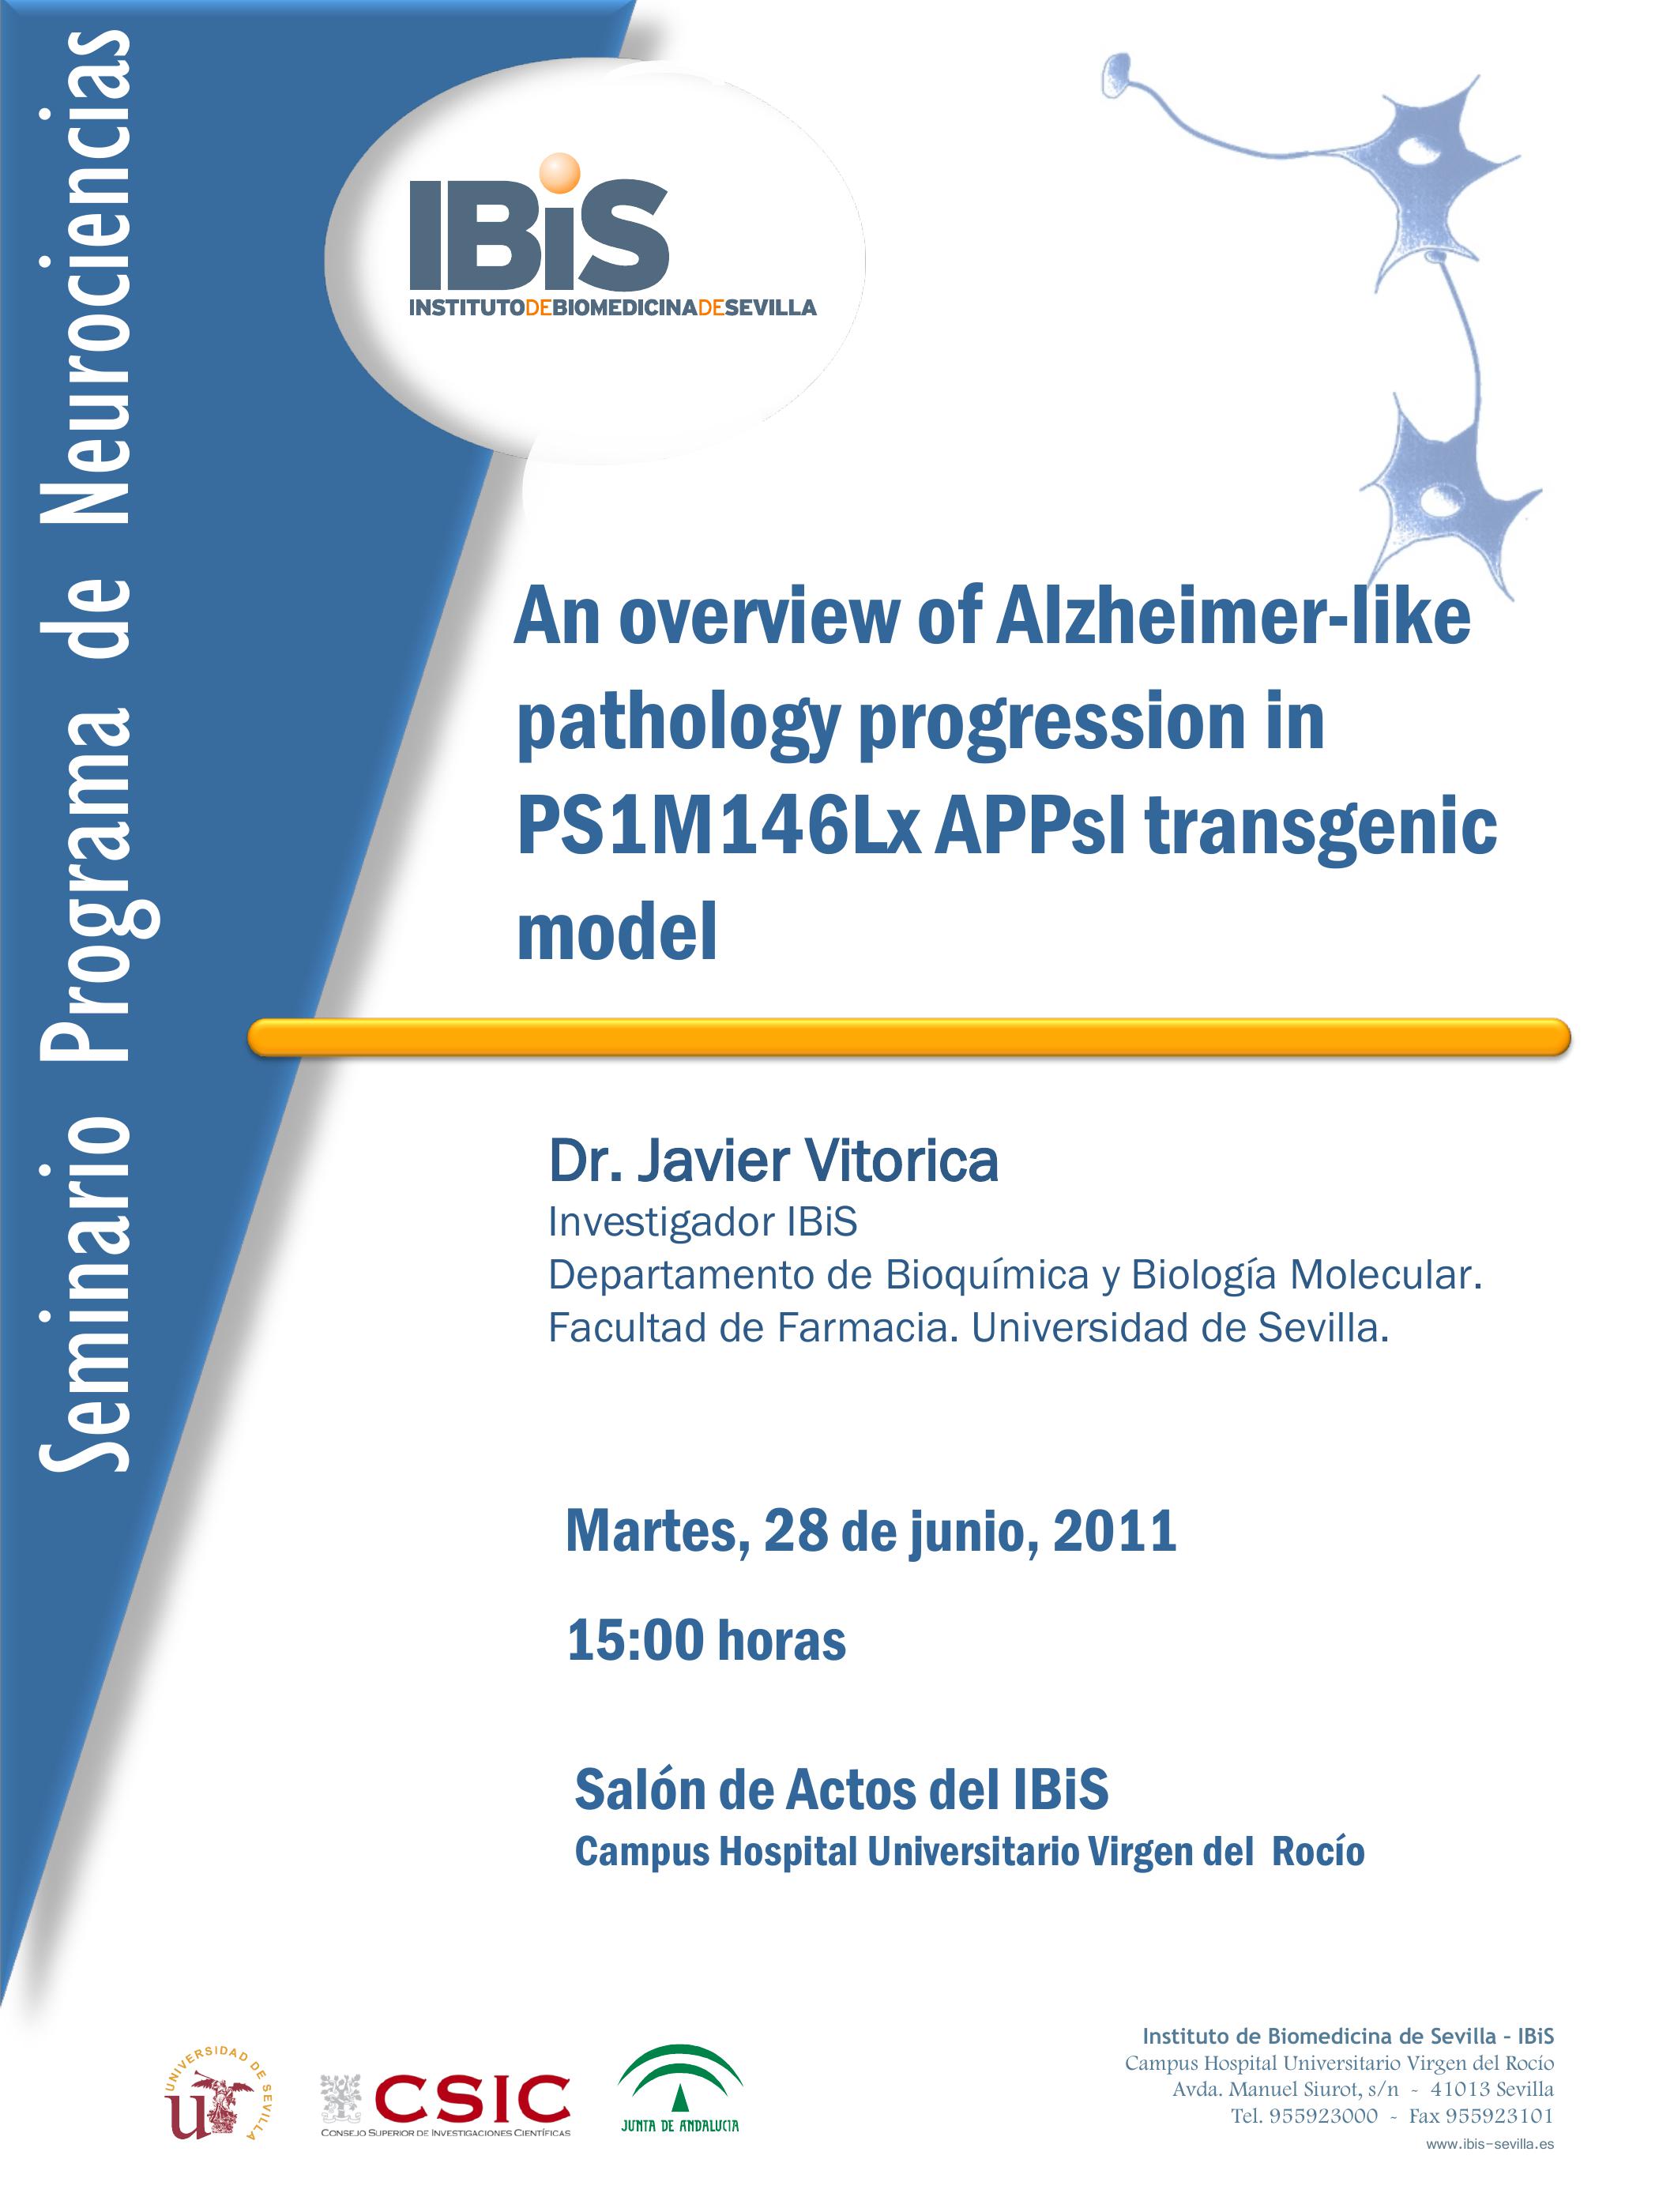 Poster: An overview of Alzheimer-like pathology progression in PS1M146Lx APPsl transgenic model